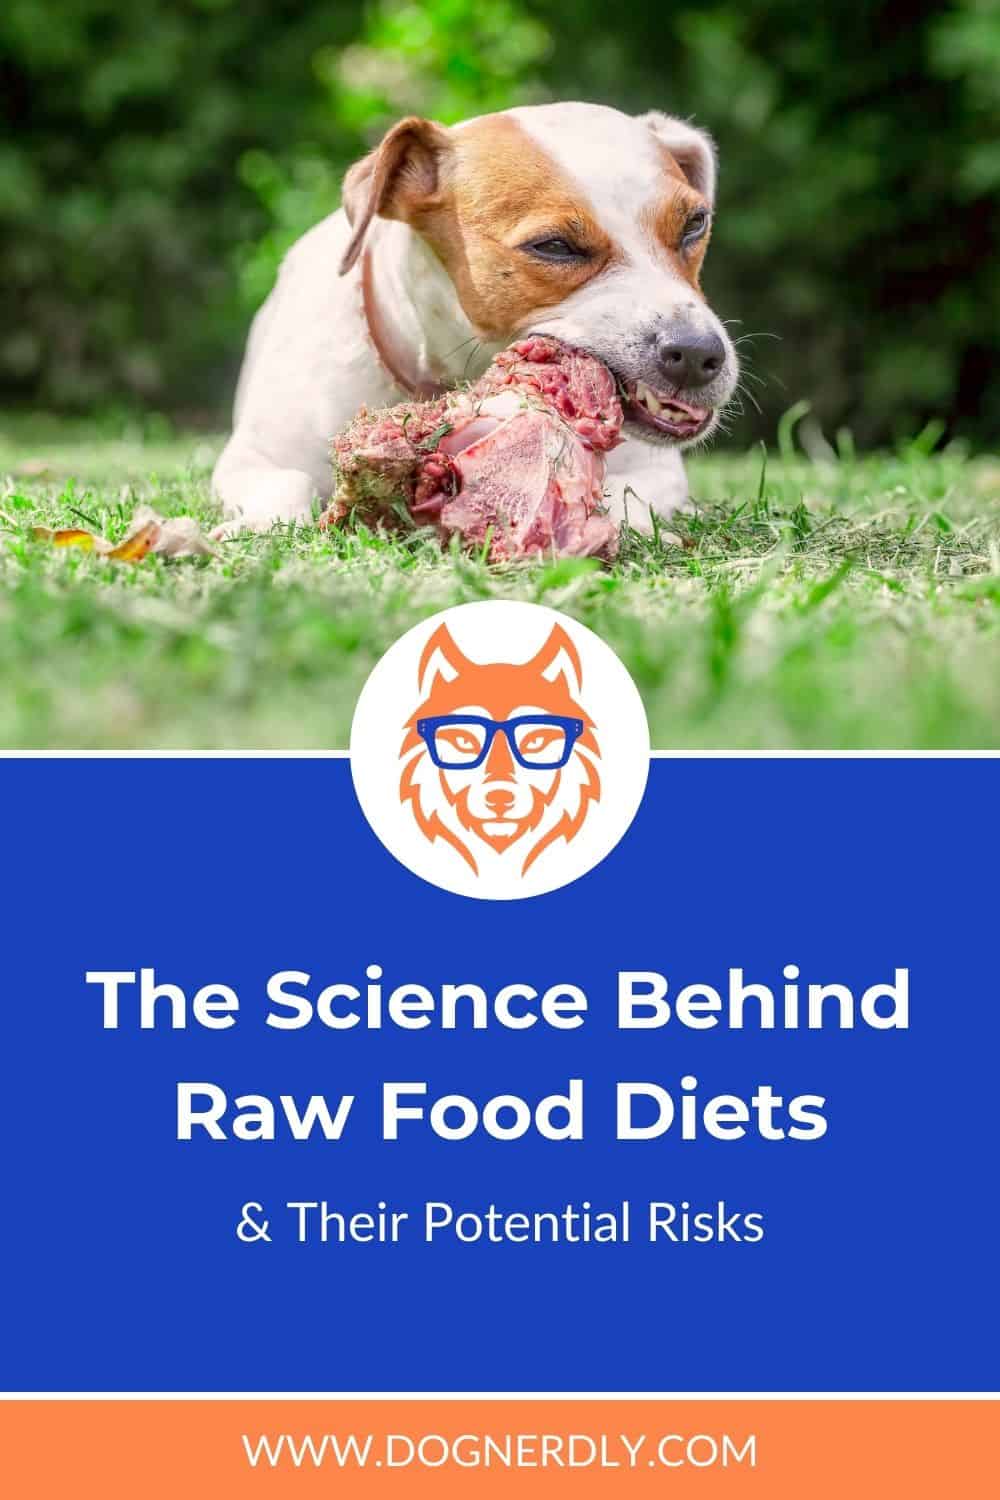 The Science Behind Raw Food Diets for Dogs and Their Potential Risks